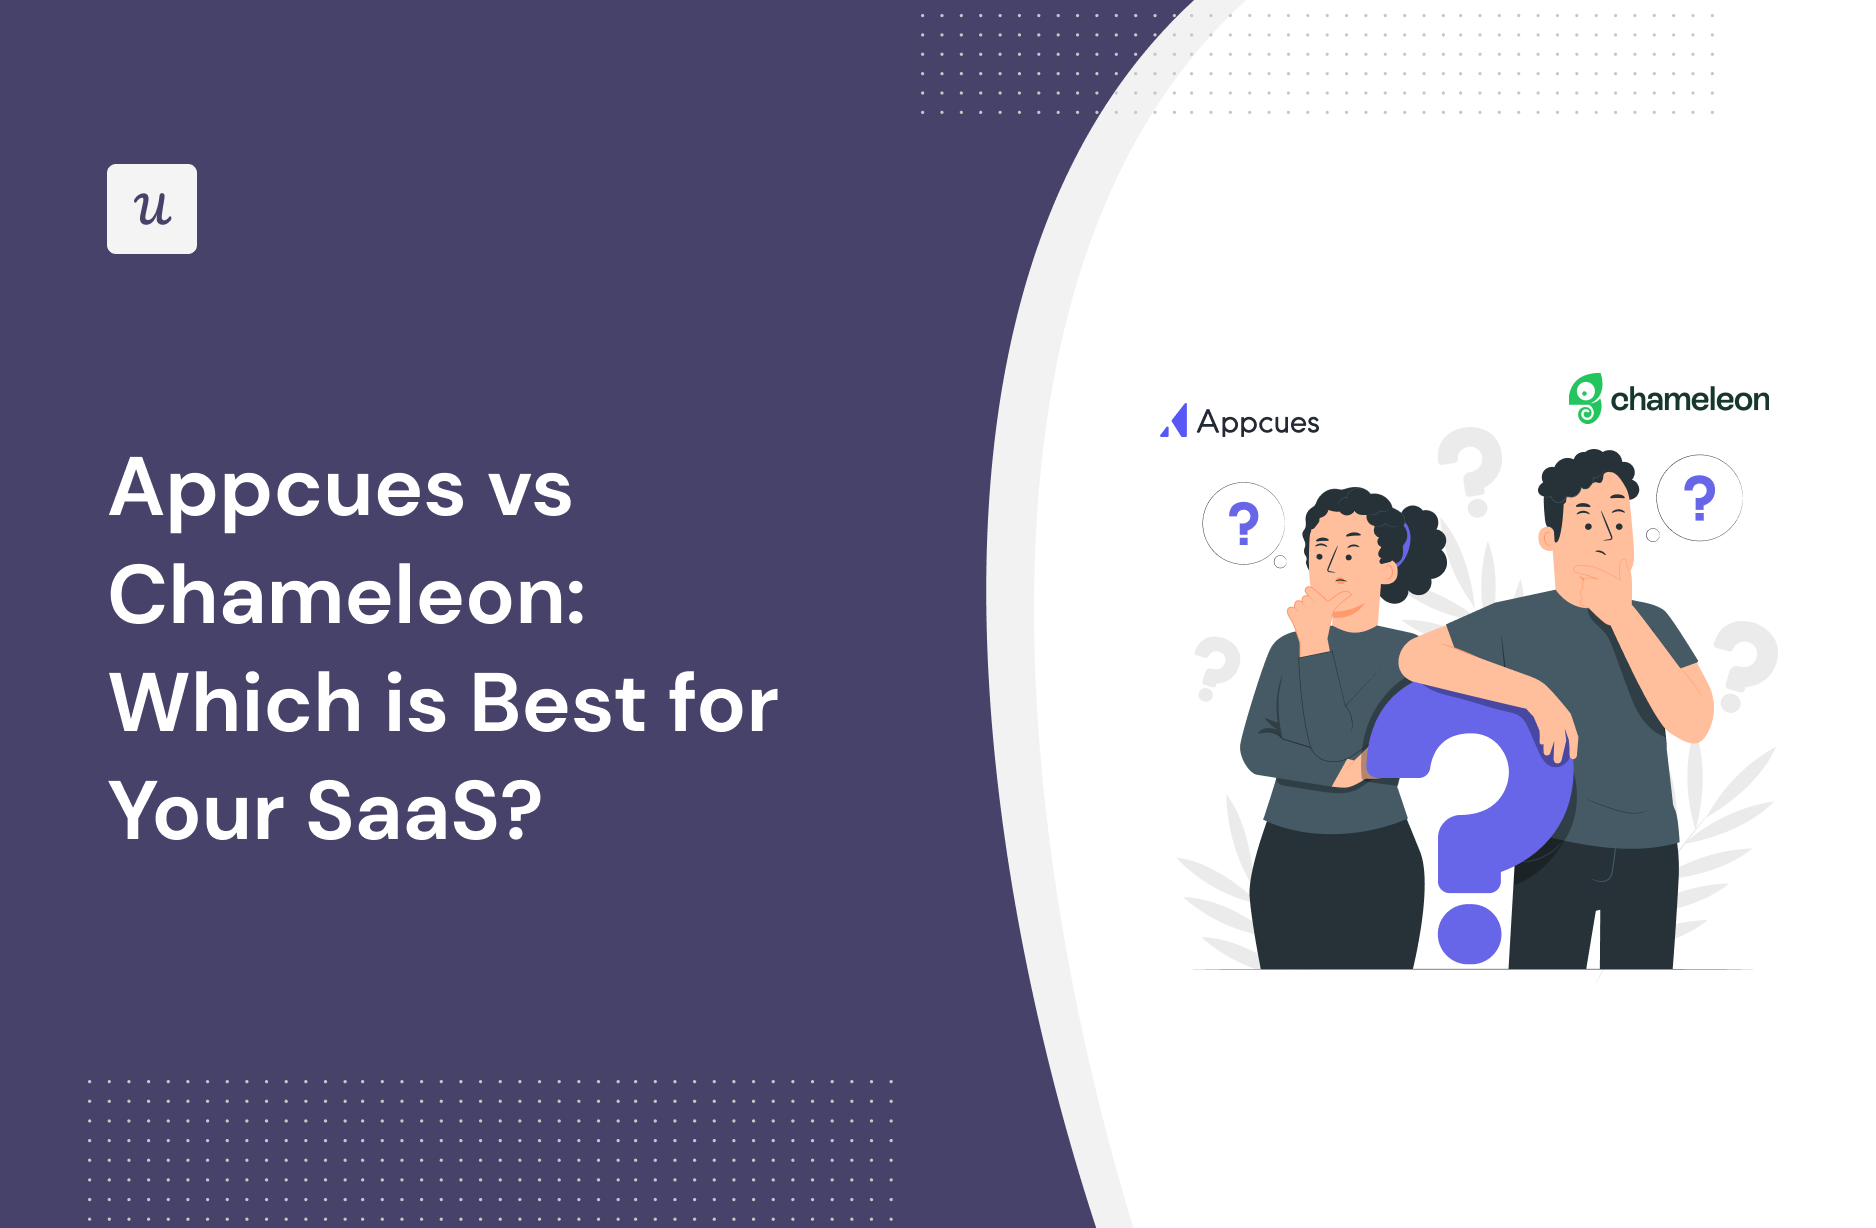 Appcues vs Chameleon: Which is Best for Your SaaS?